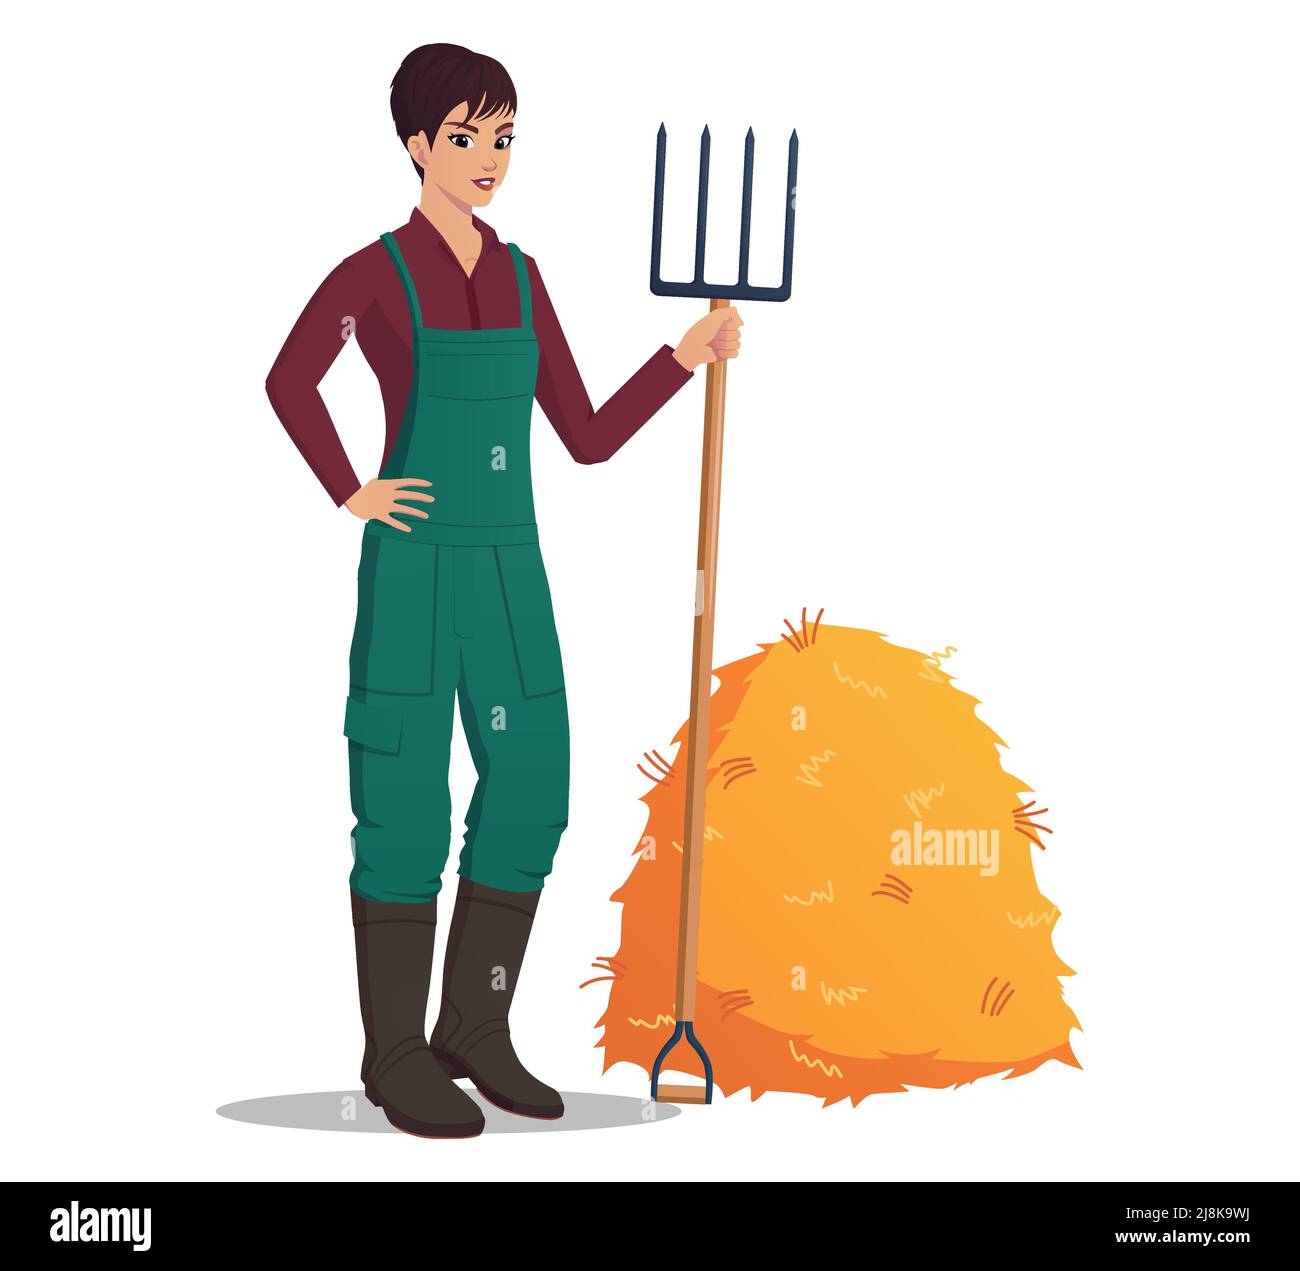 Woman Farmer with Fork and Hay pile character illustration Stock Vector